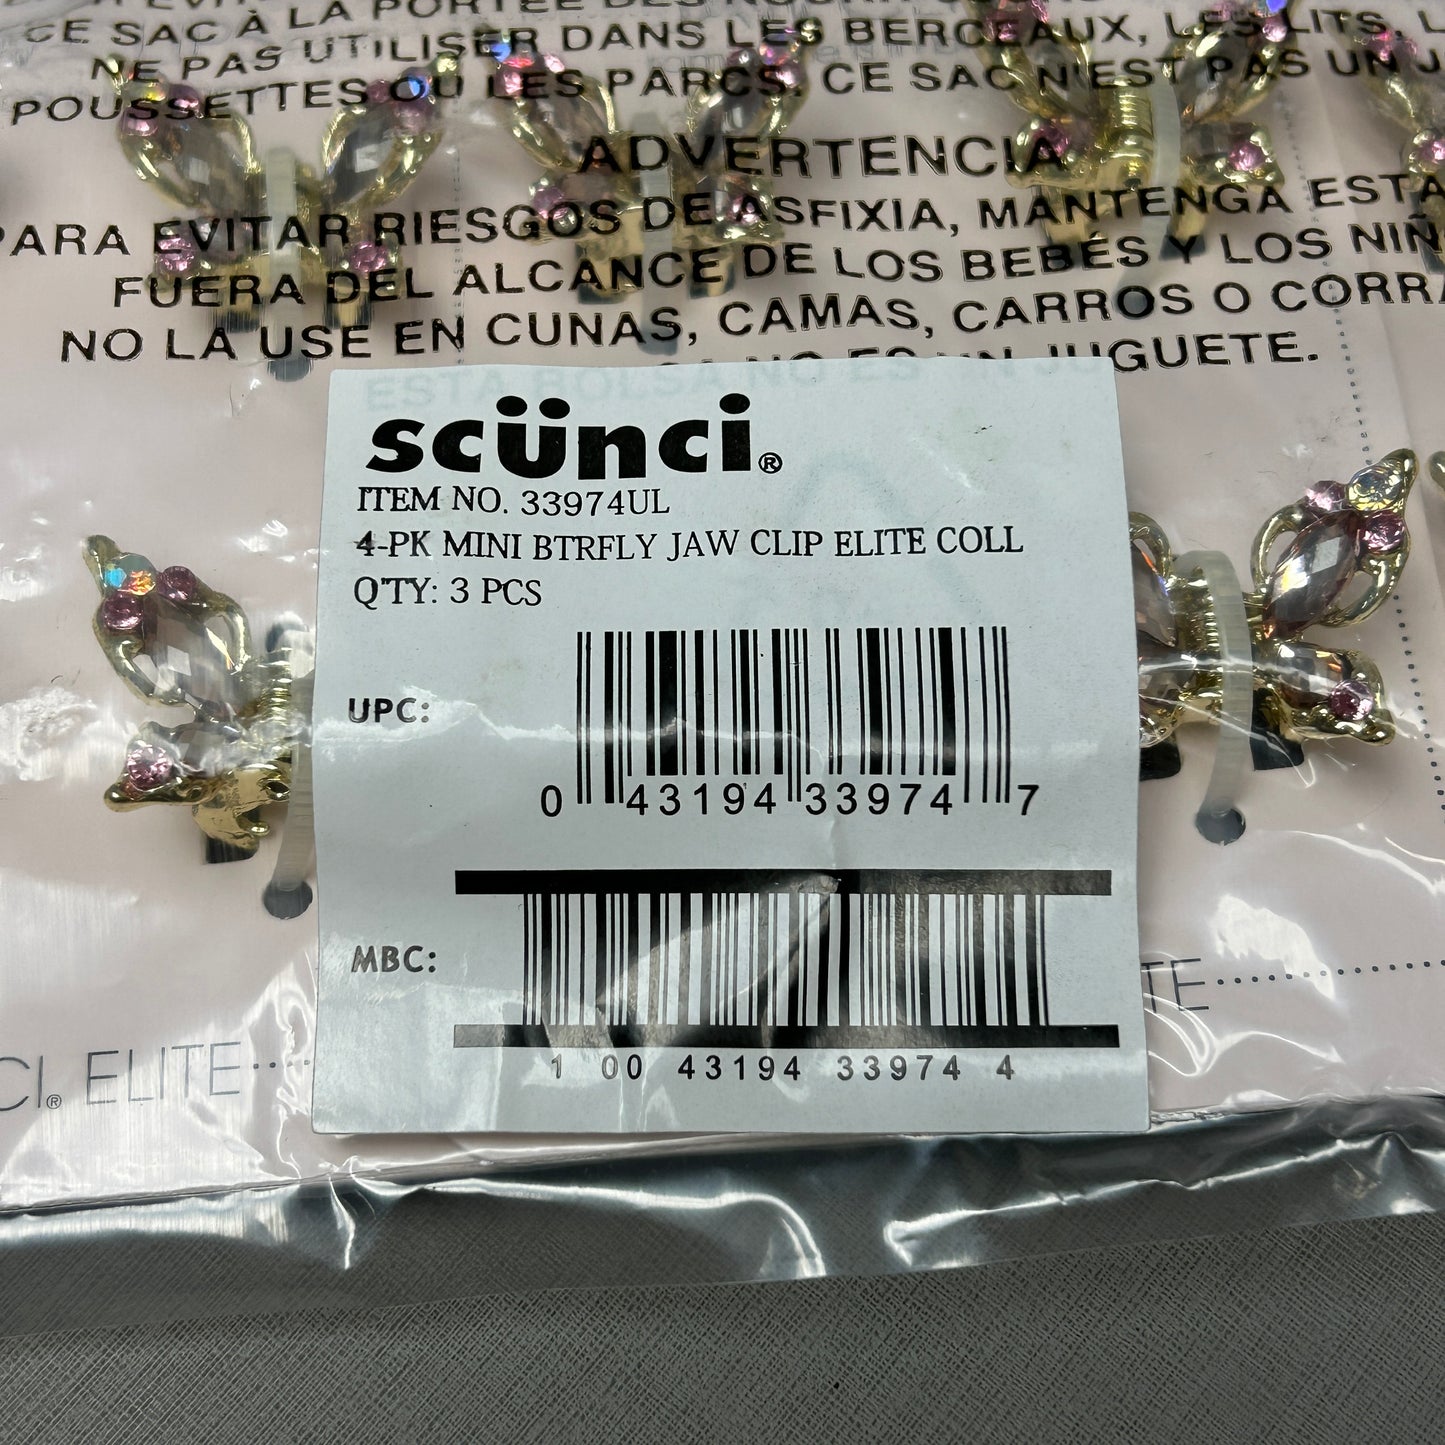 SCUNCI 3-PACK! Elite Mini Butterfly Jaw Clip, 4-Pieces (New)